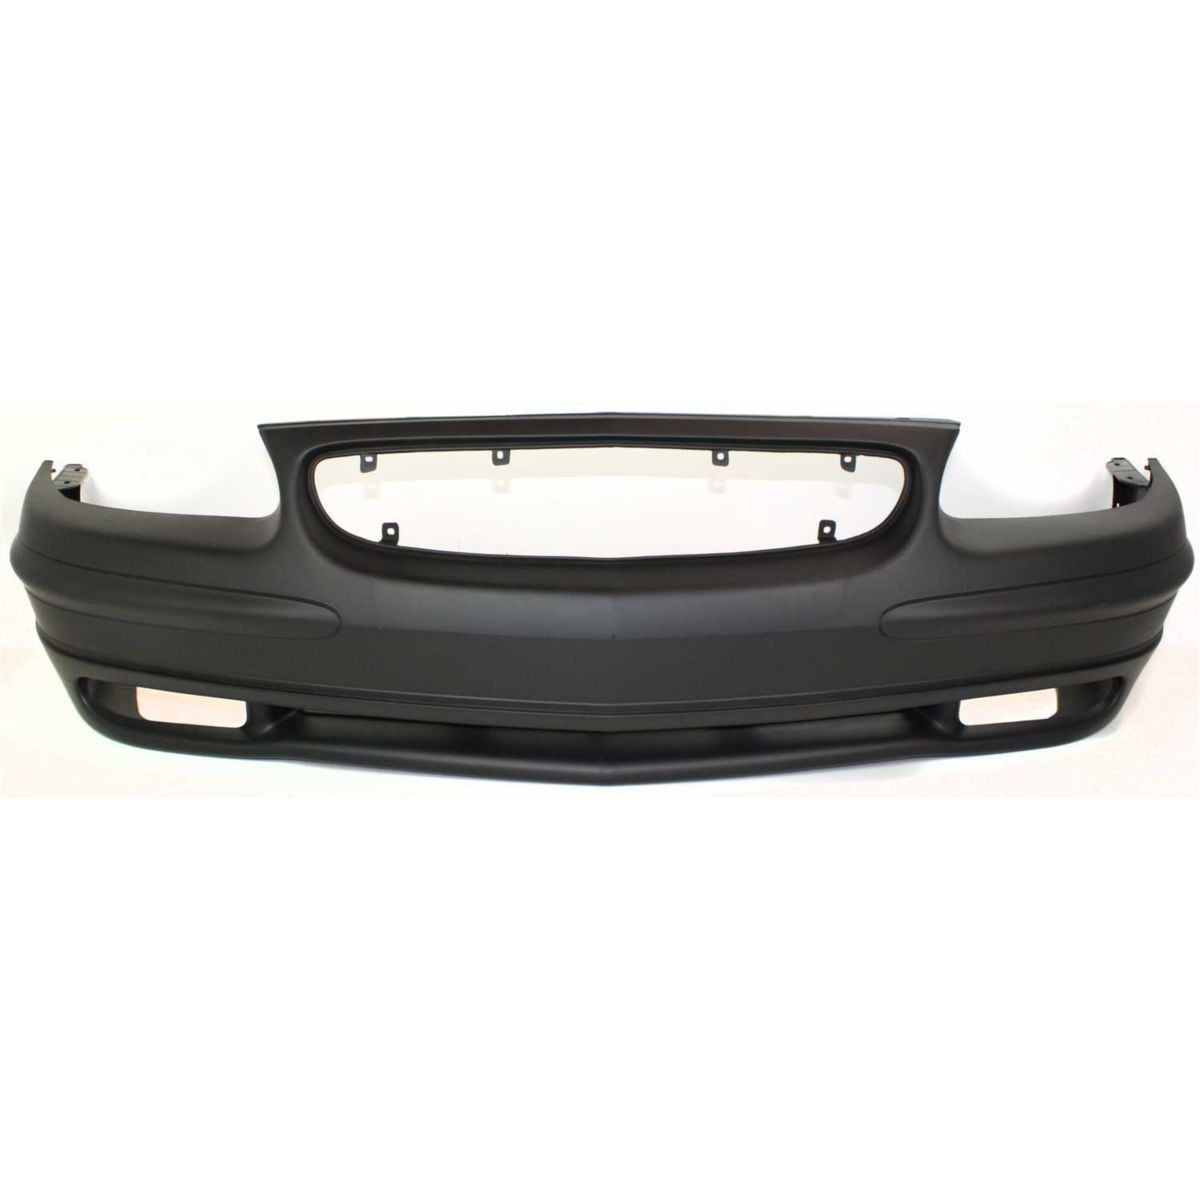 1997-2005 BUICK REGAL Front Bumper Cover Painted to Match